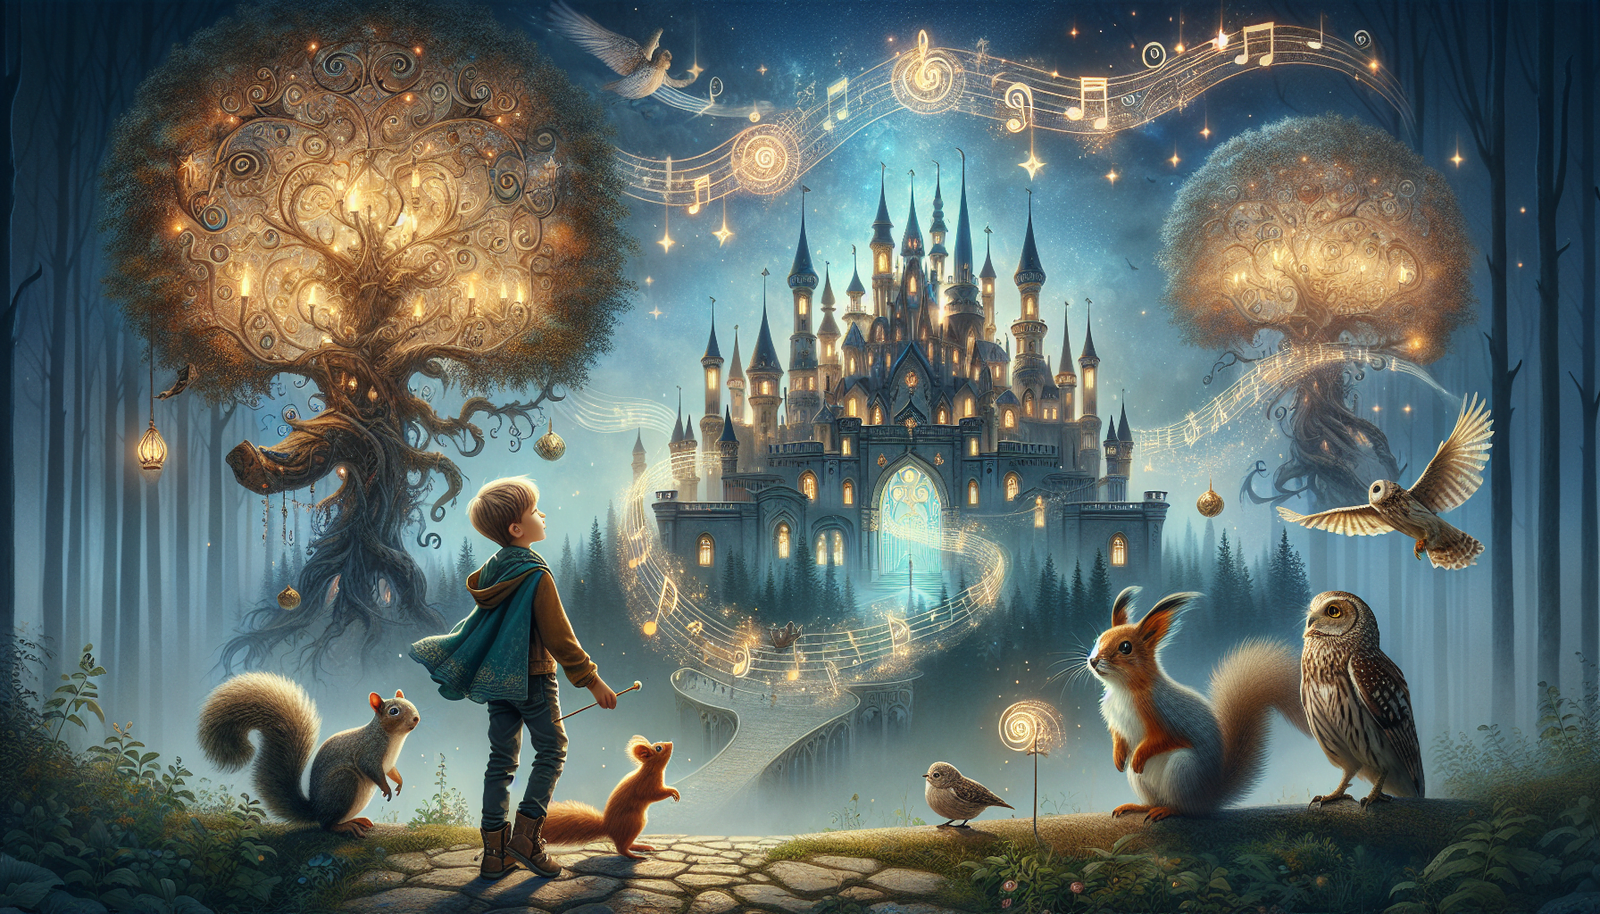 A young boy stands in front of a magical castle with his animal friends.